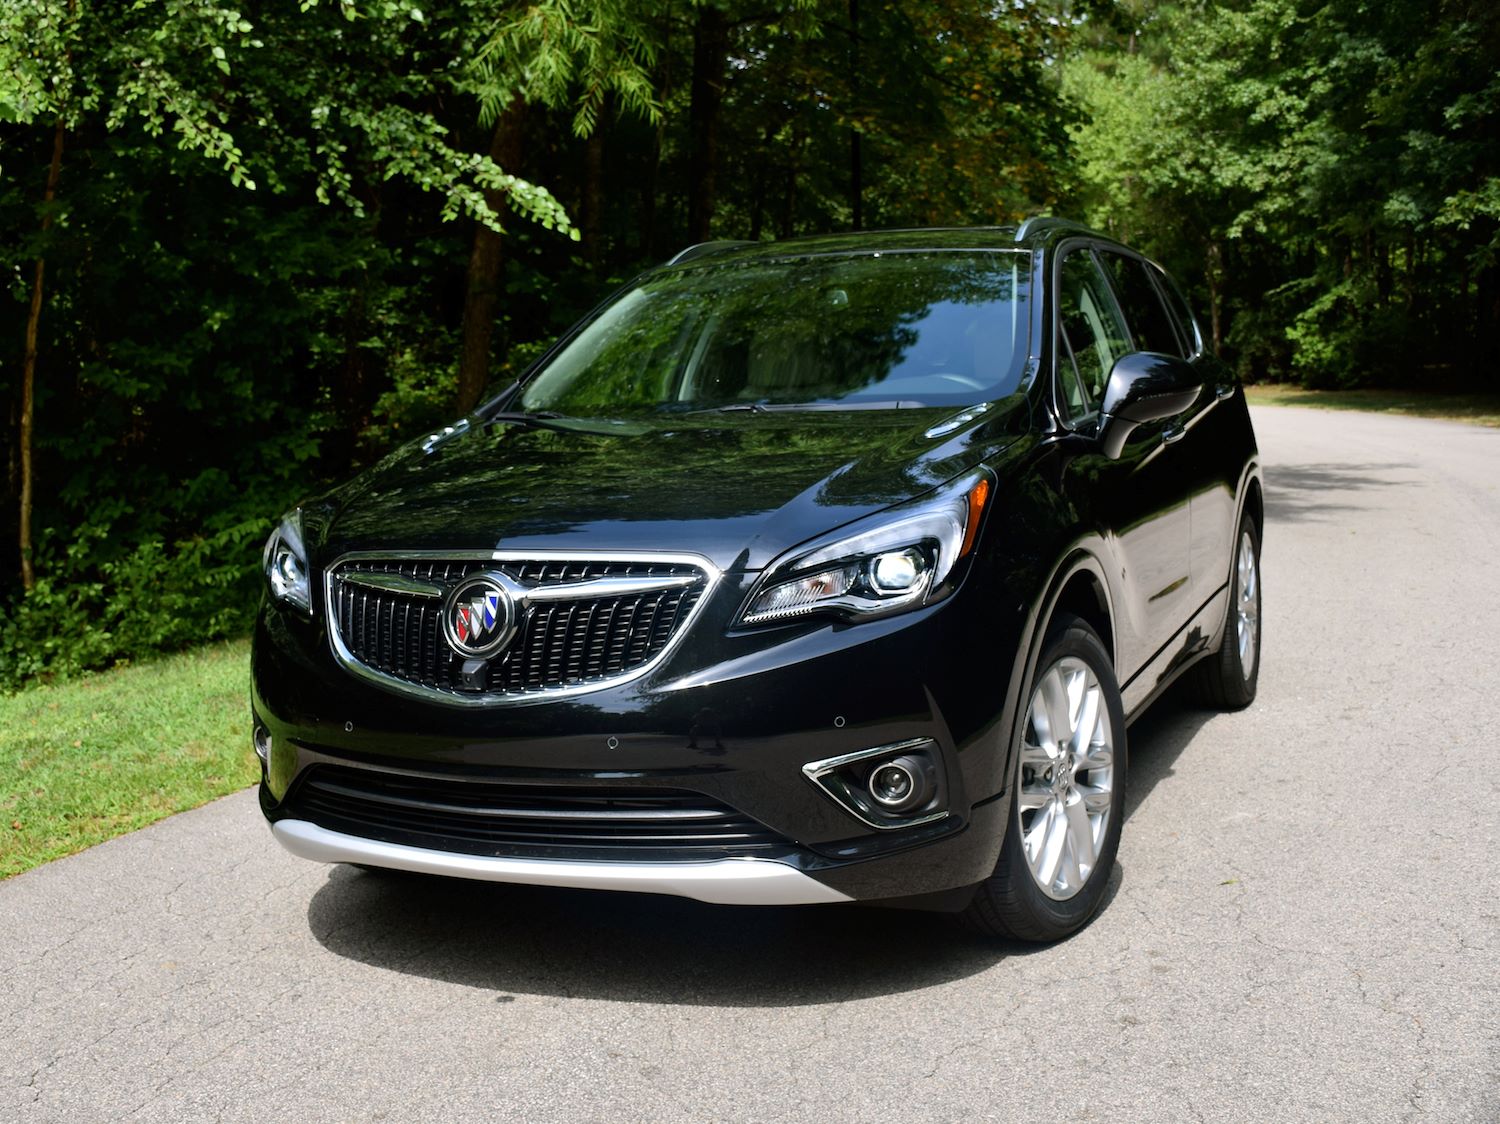 2019 Buick Envision front